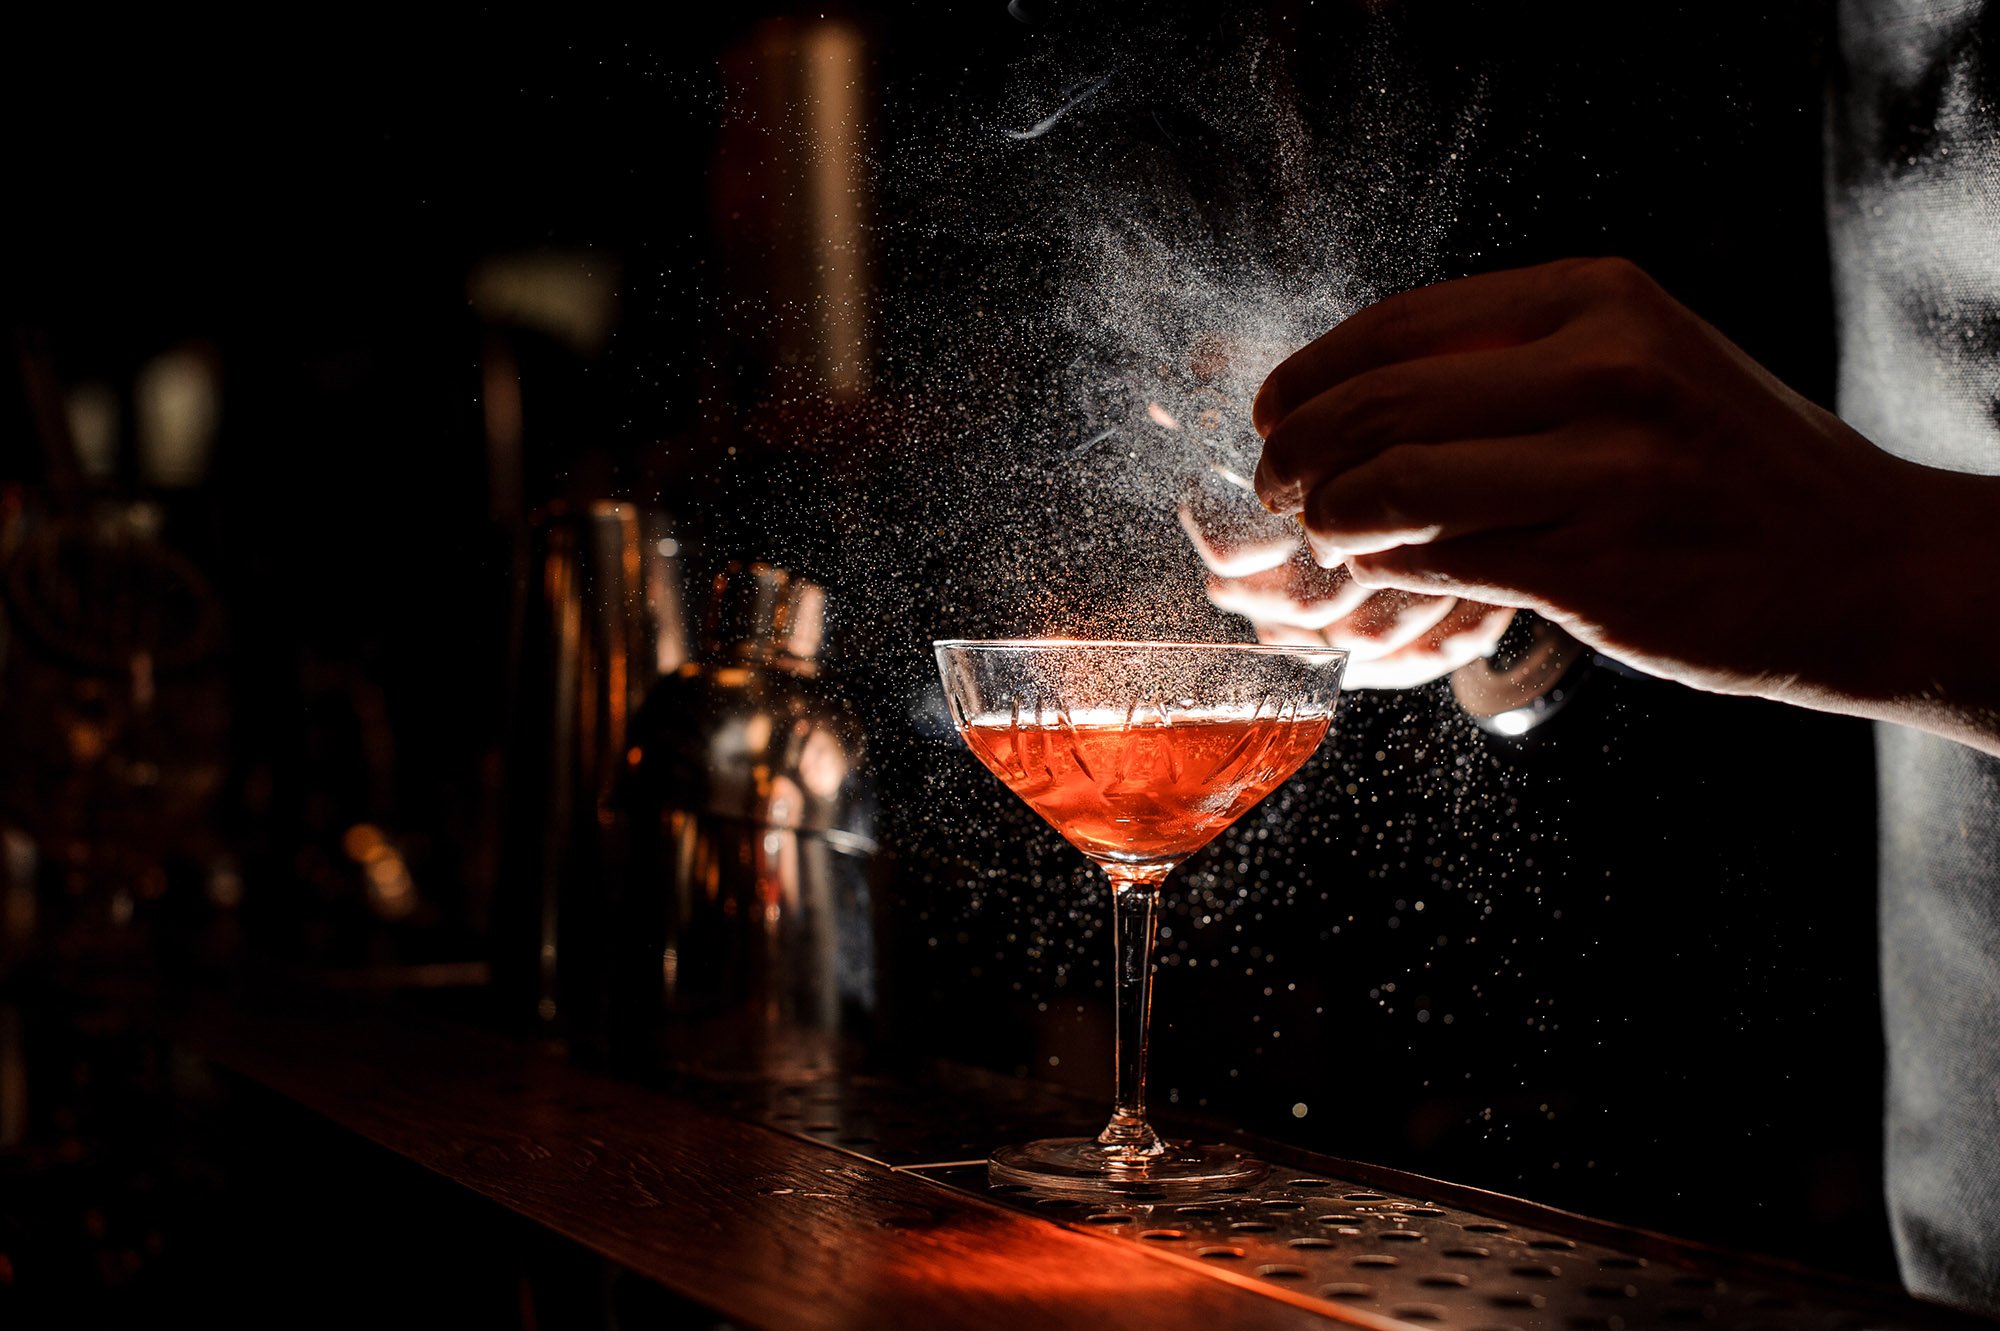 Bartender's hands sprinkling the juice into the cocktail glass